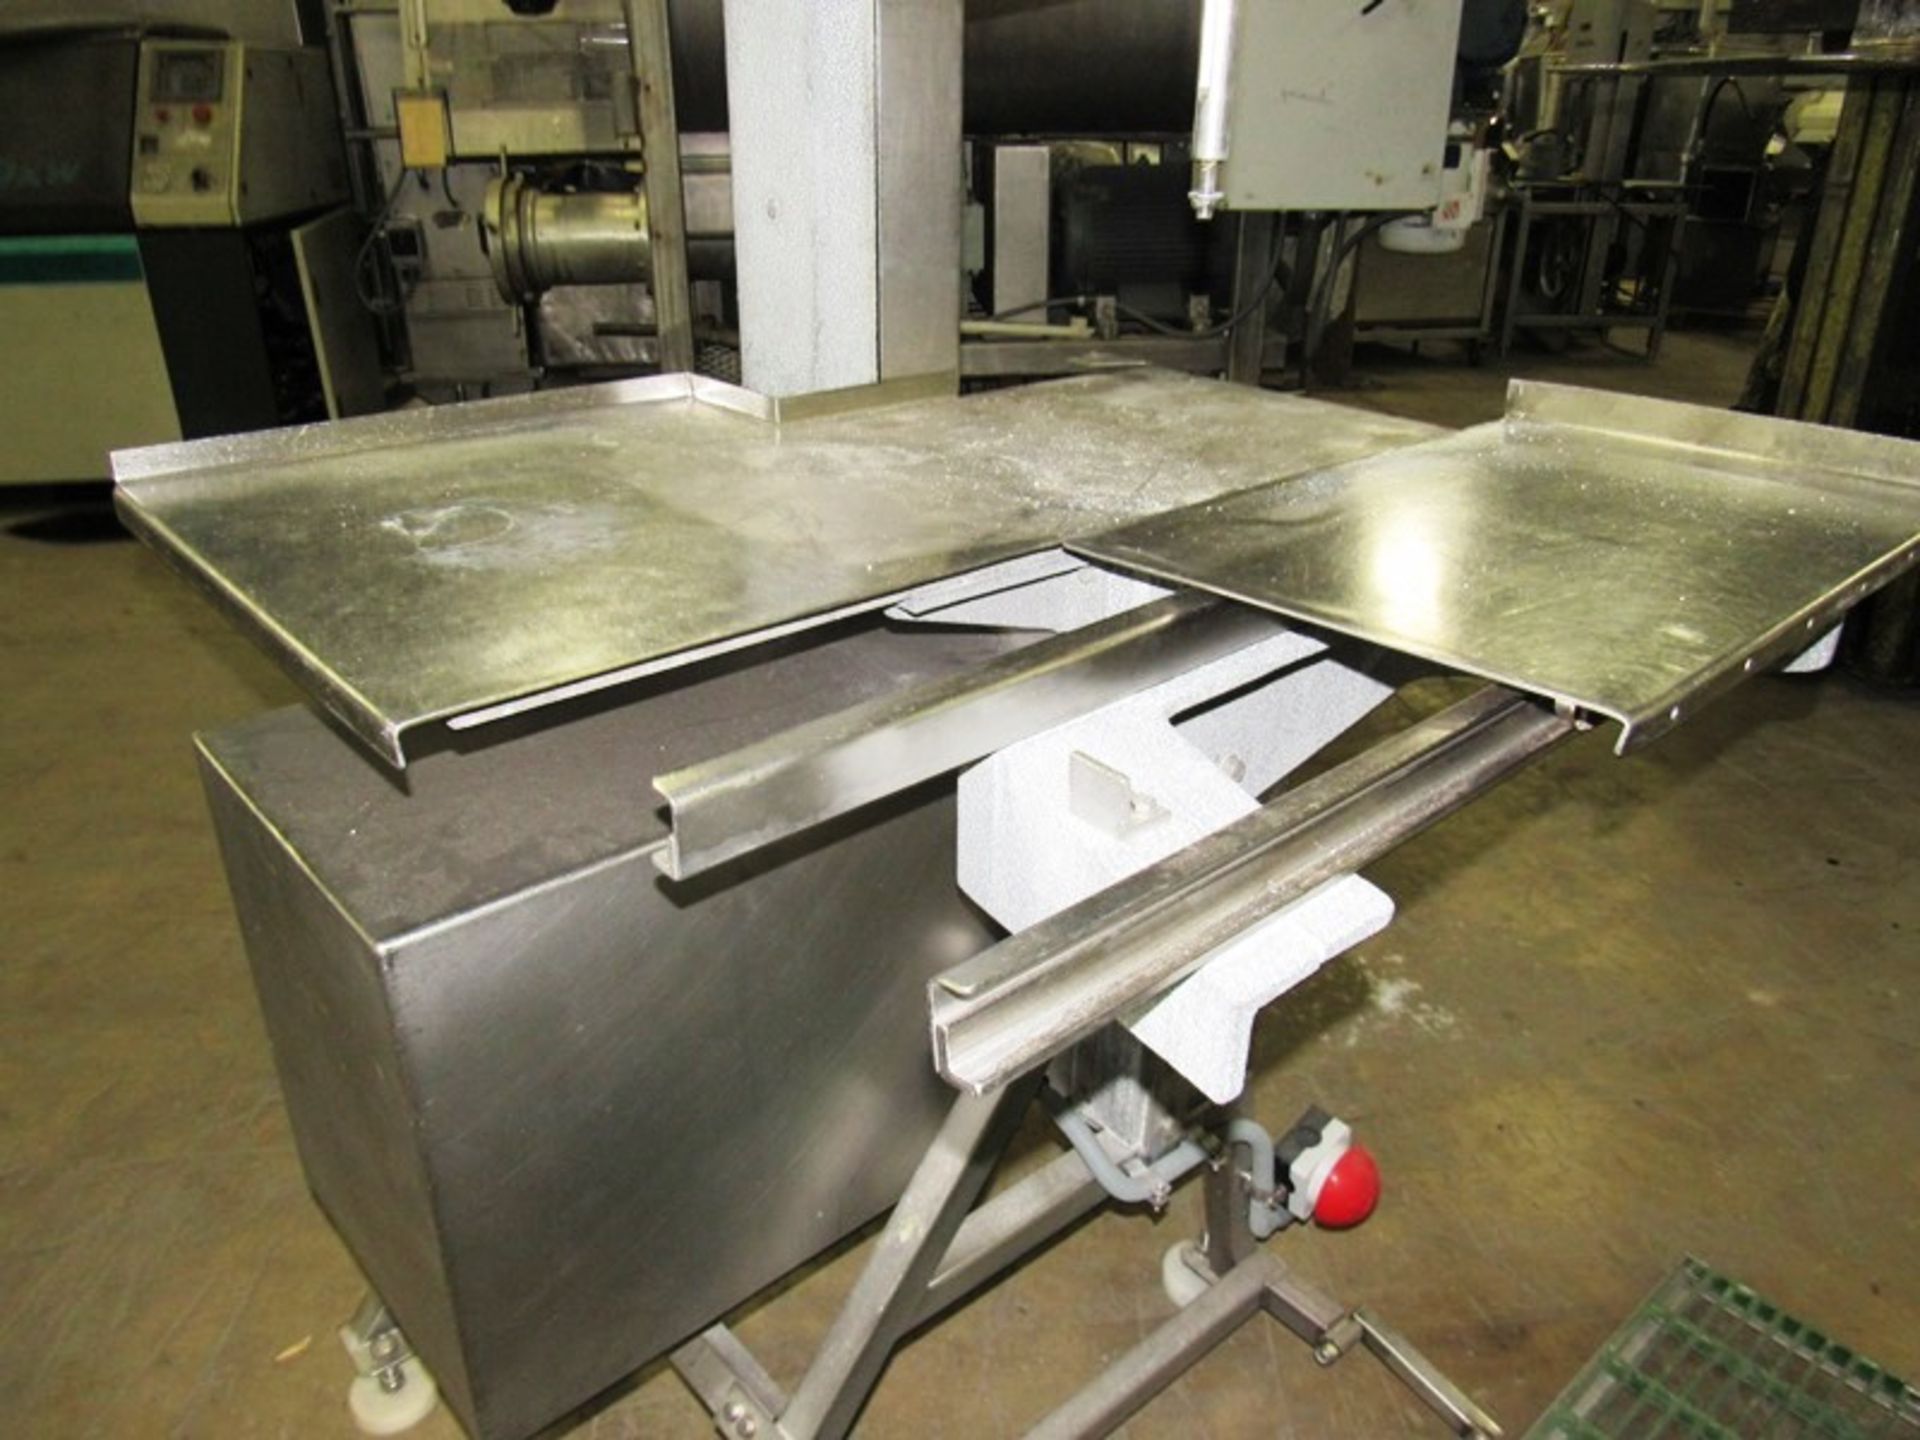 AEW Mdl. 400 Bandsaw, aluminum frame, stainless steel head & table, platform attached - Image 6 of 12